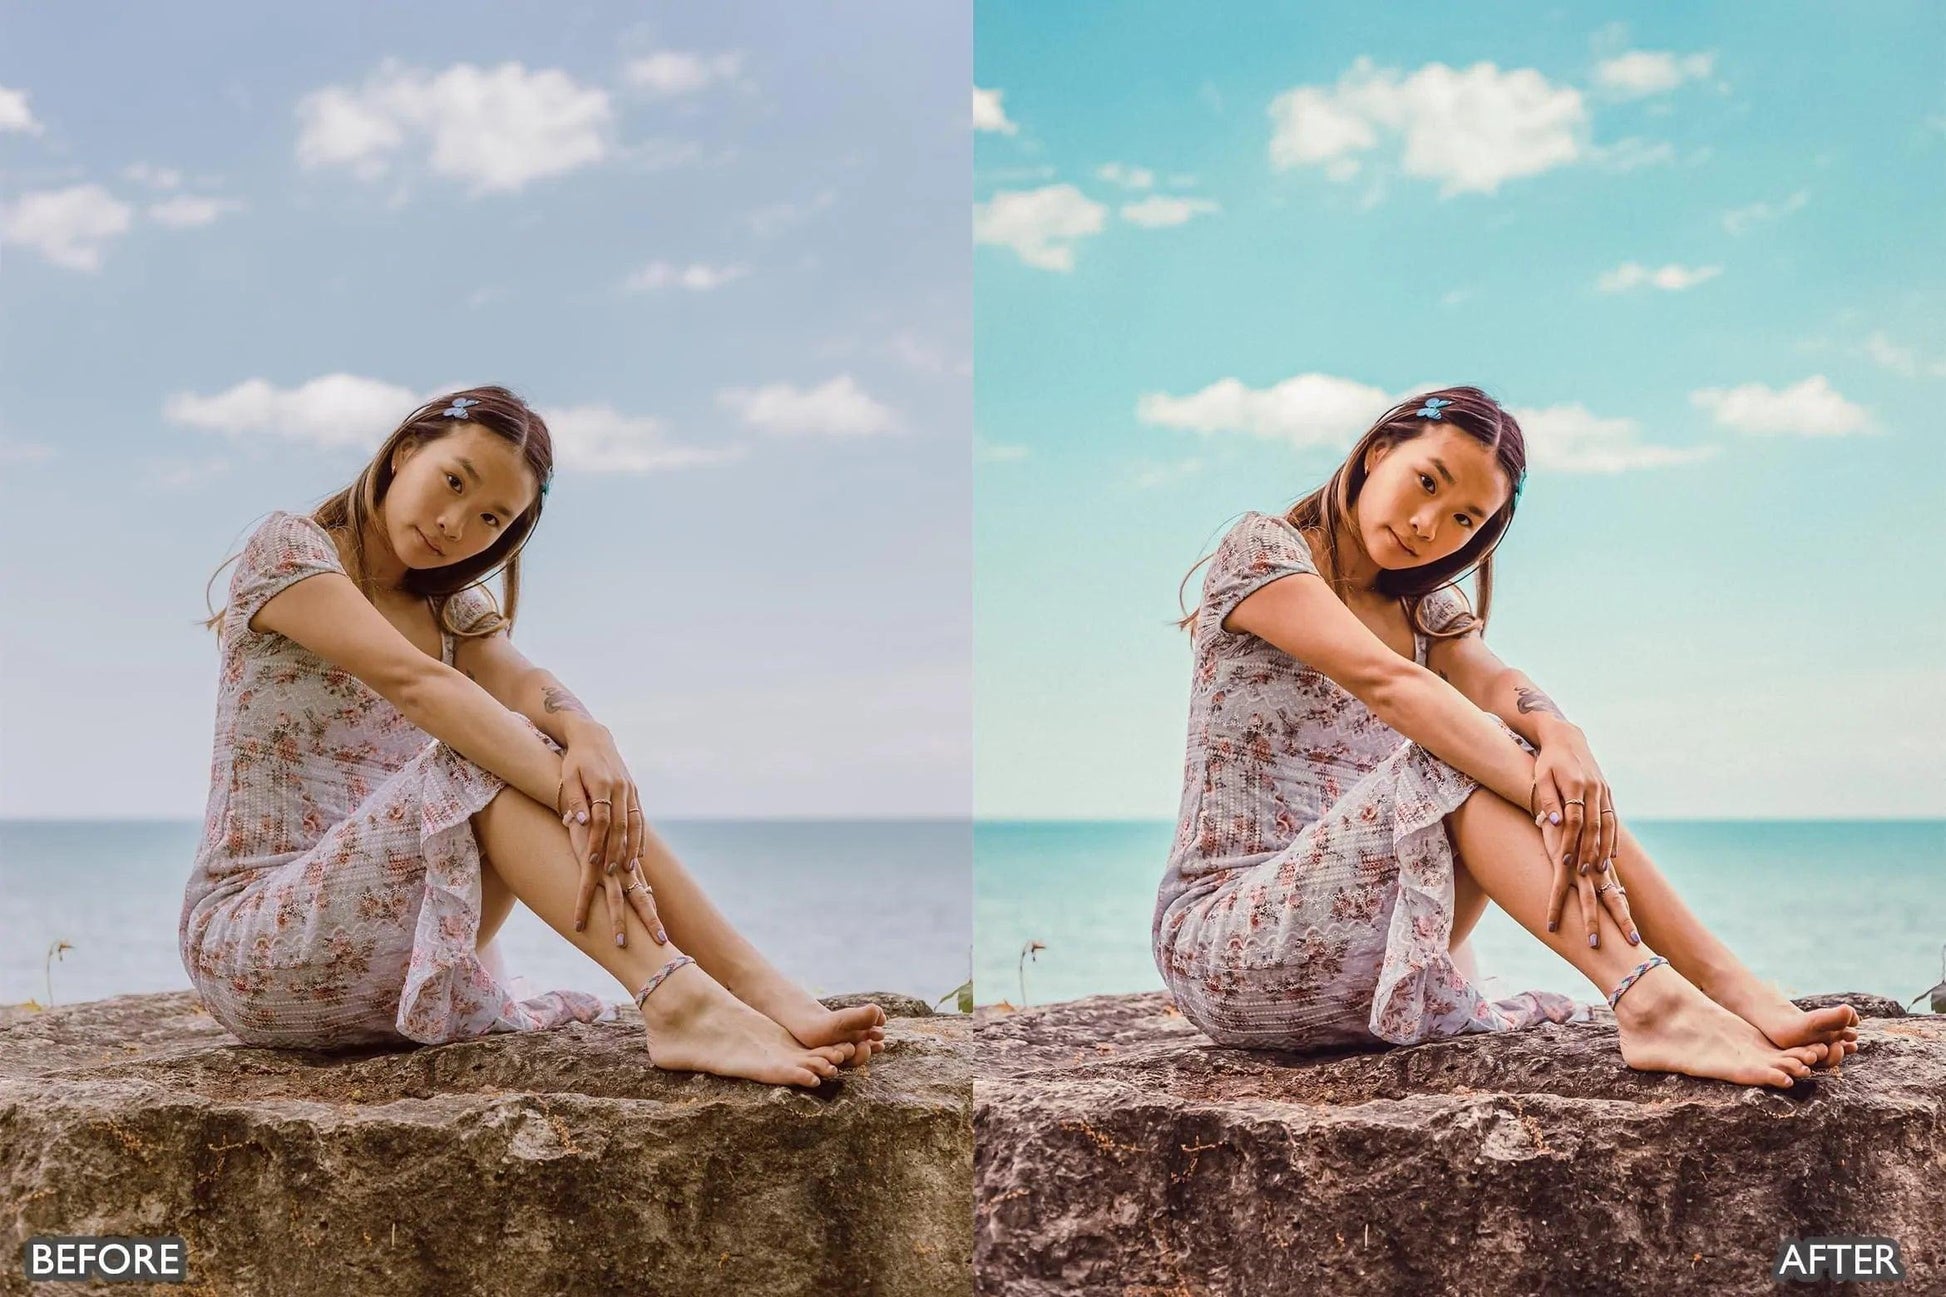 Bright and Airy Lightroom Presets - adobe lightroom presets, black presets, bright presets, brown presets, Cinematic Presets, instagram presets, lightroom presets, Portrait presets, presets before and after, professional lightroom presets - aaapresets.com